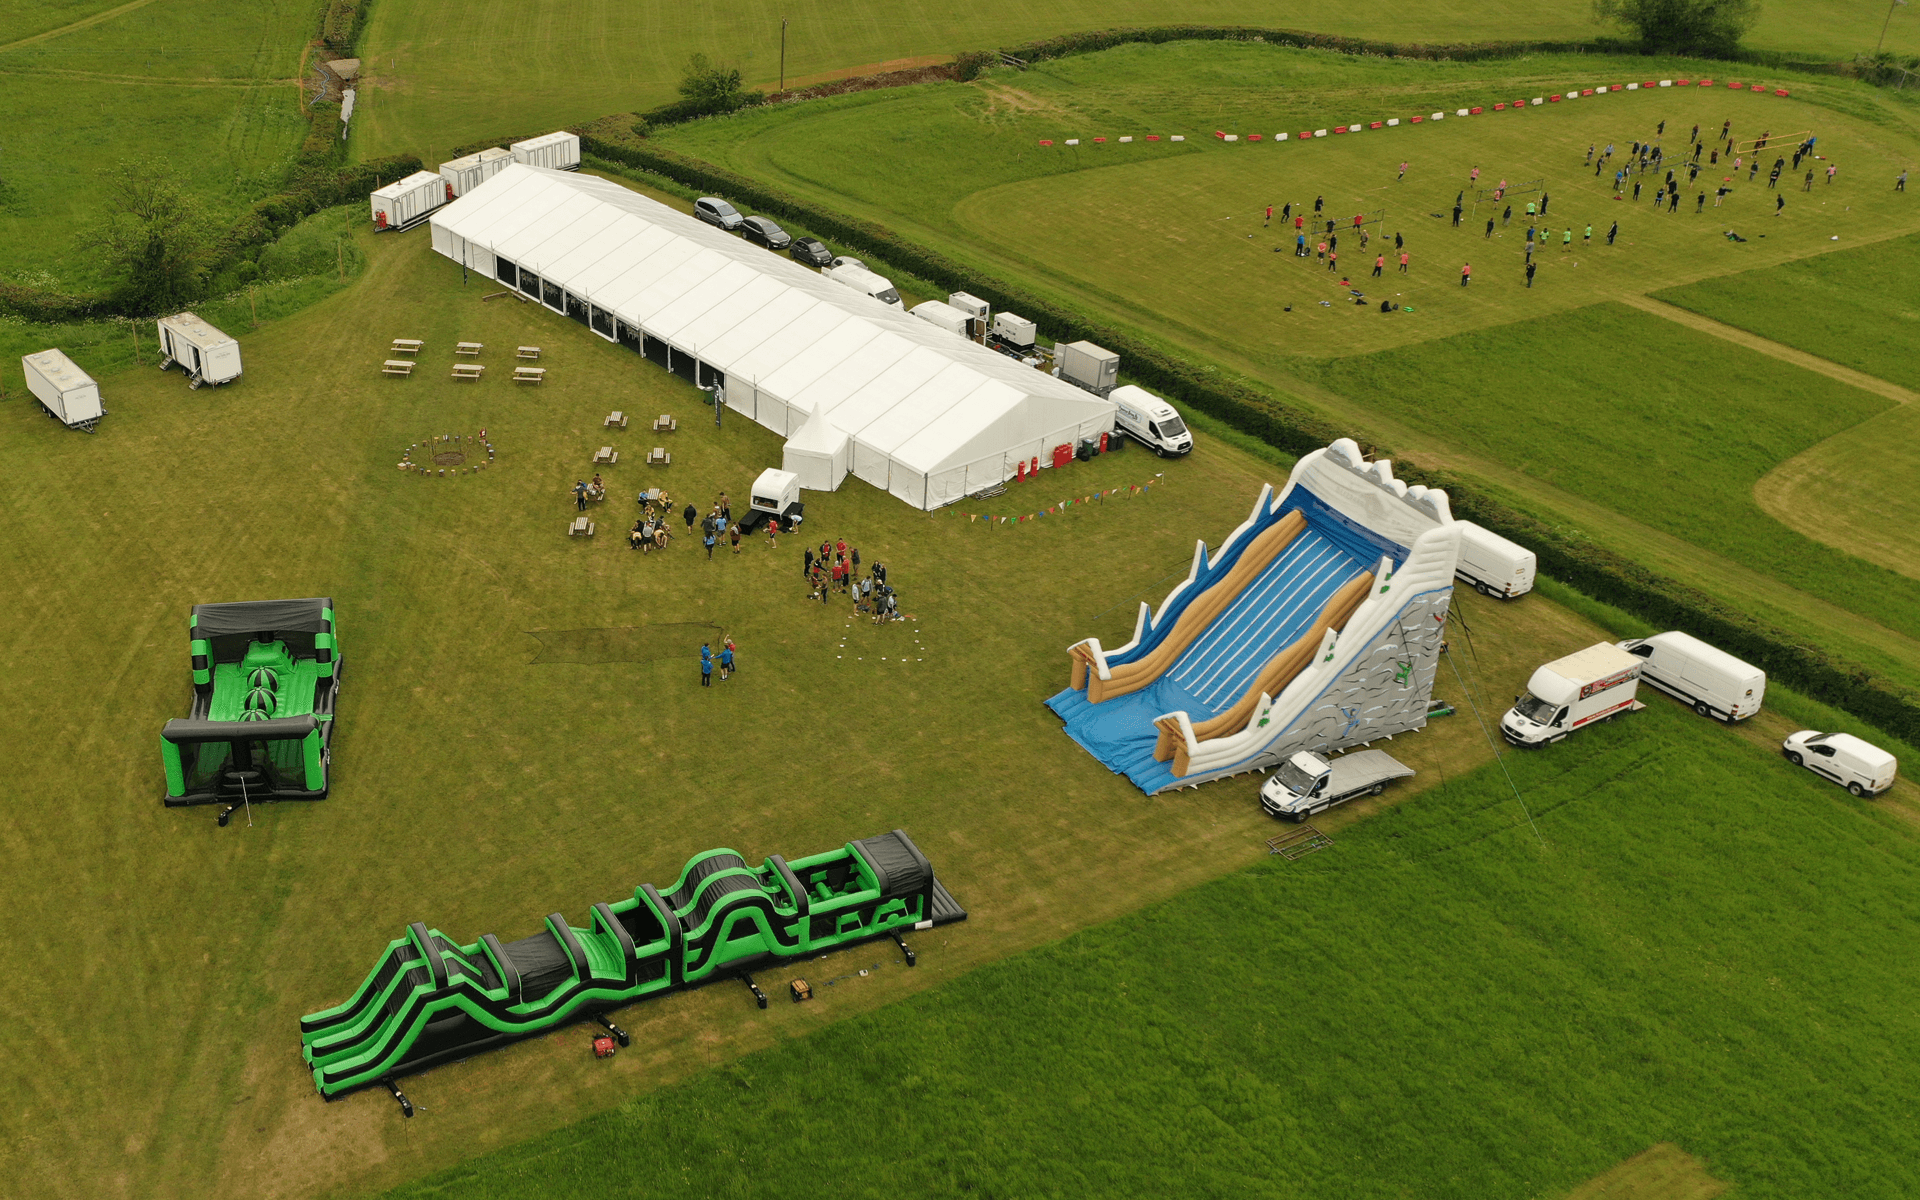 "Mavic 2 Pro" aerial drone photo of inflatable obstacle course in field at "Hydrock" corporate event in almondsbury bristol